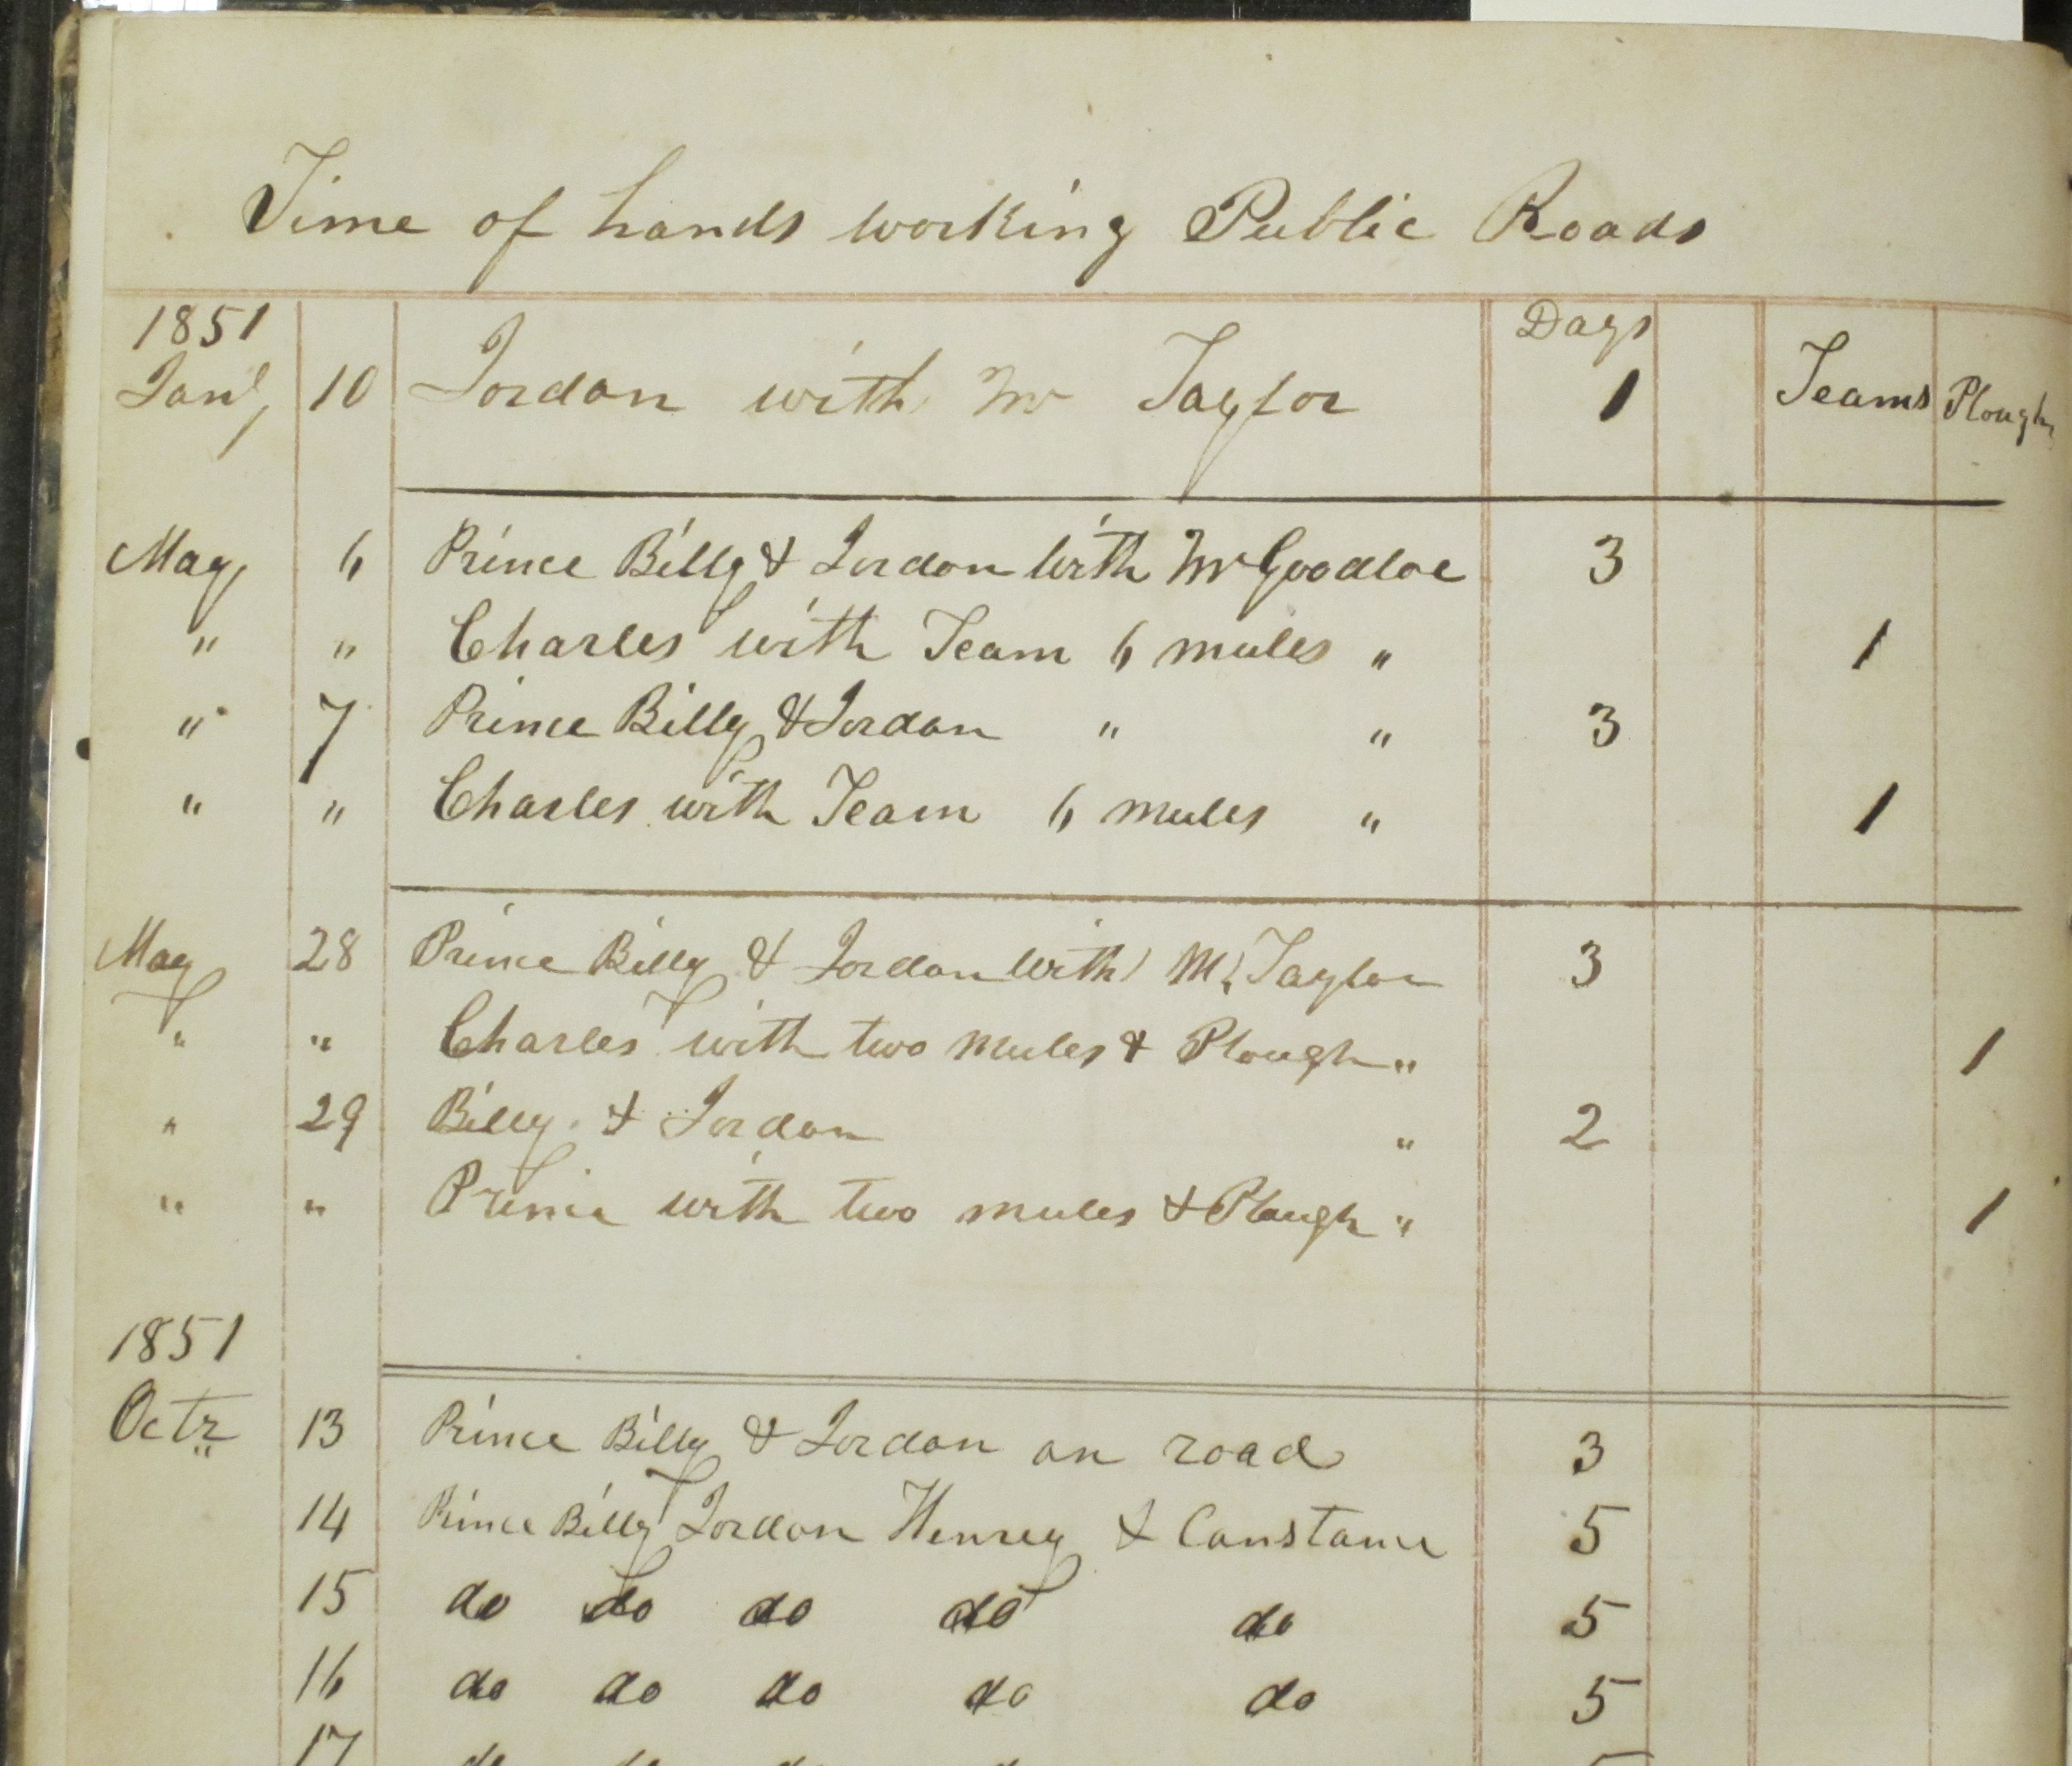 A page, featuring the time records for "hands" from volume 3 of the Buffalo and Bath Forge and Furnace account books. (MSS 38-98-d. Coles Special Collections Fund. Photograph by Petrina Jackson)